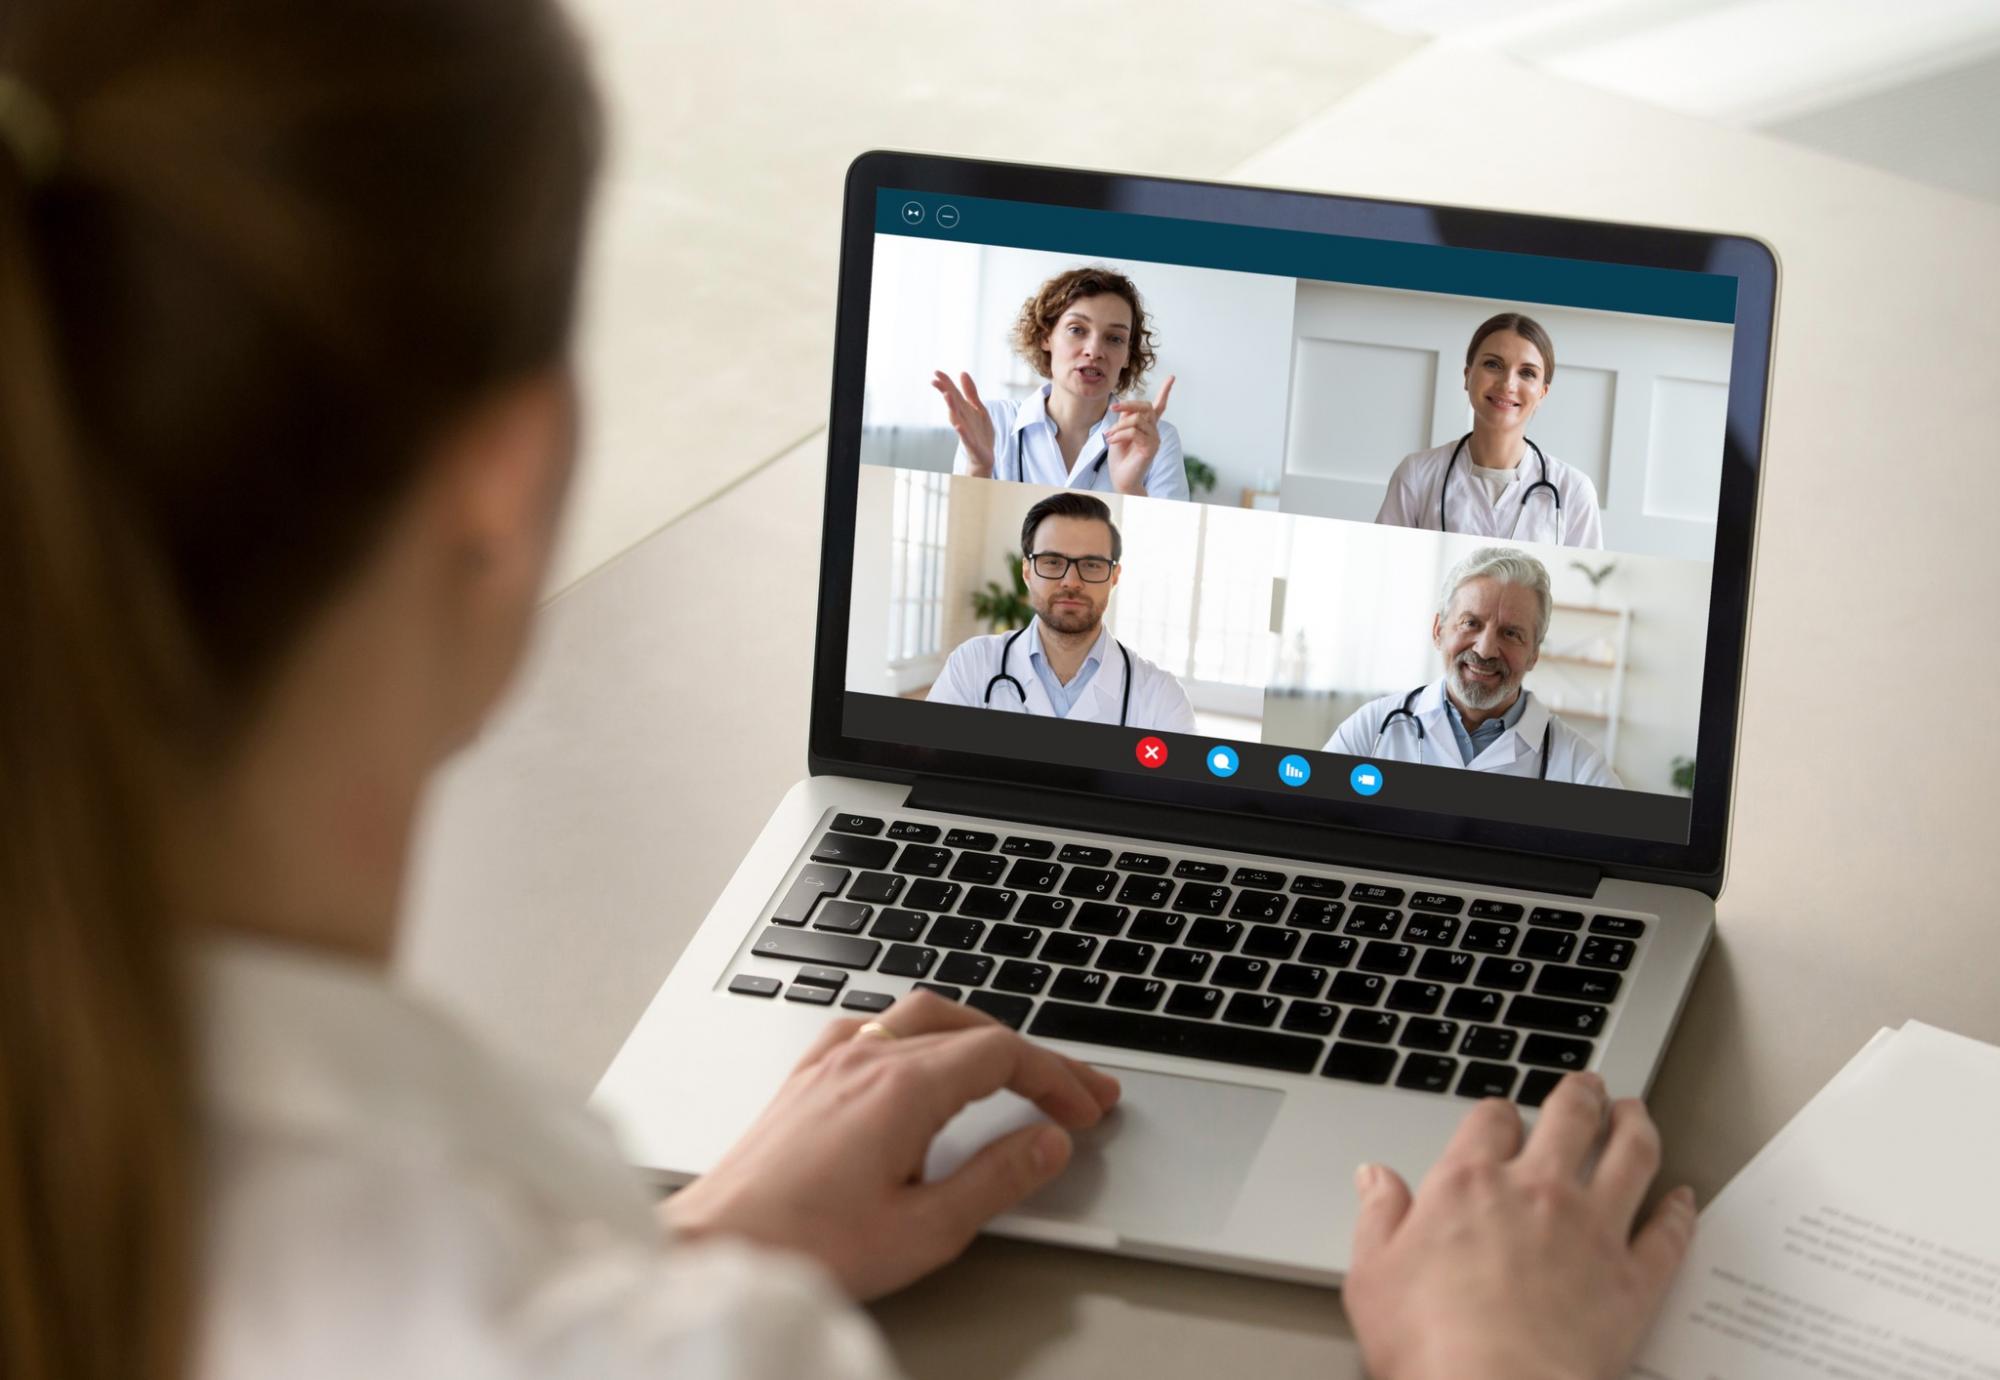 Doctor using a laptop to communicate virtually with colleagues